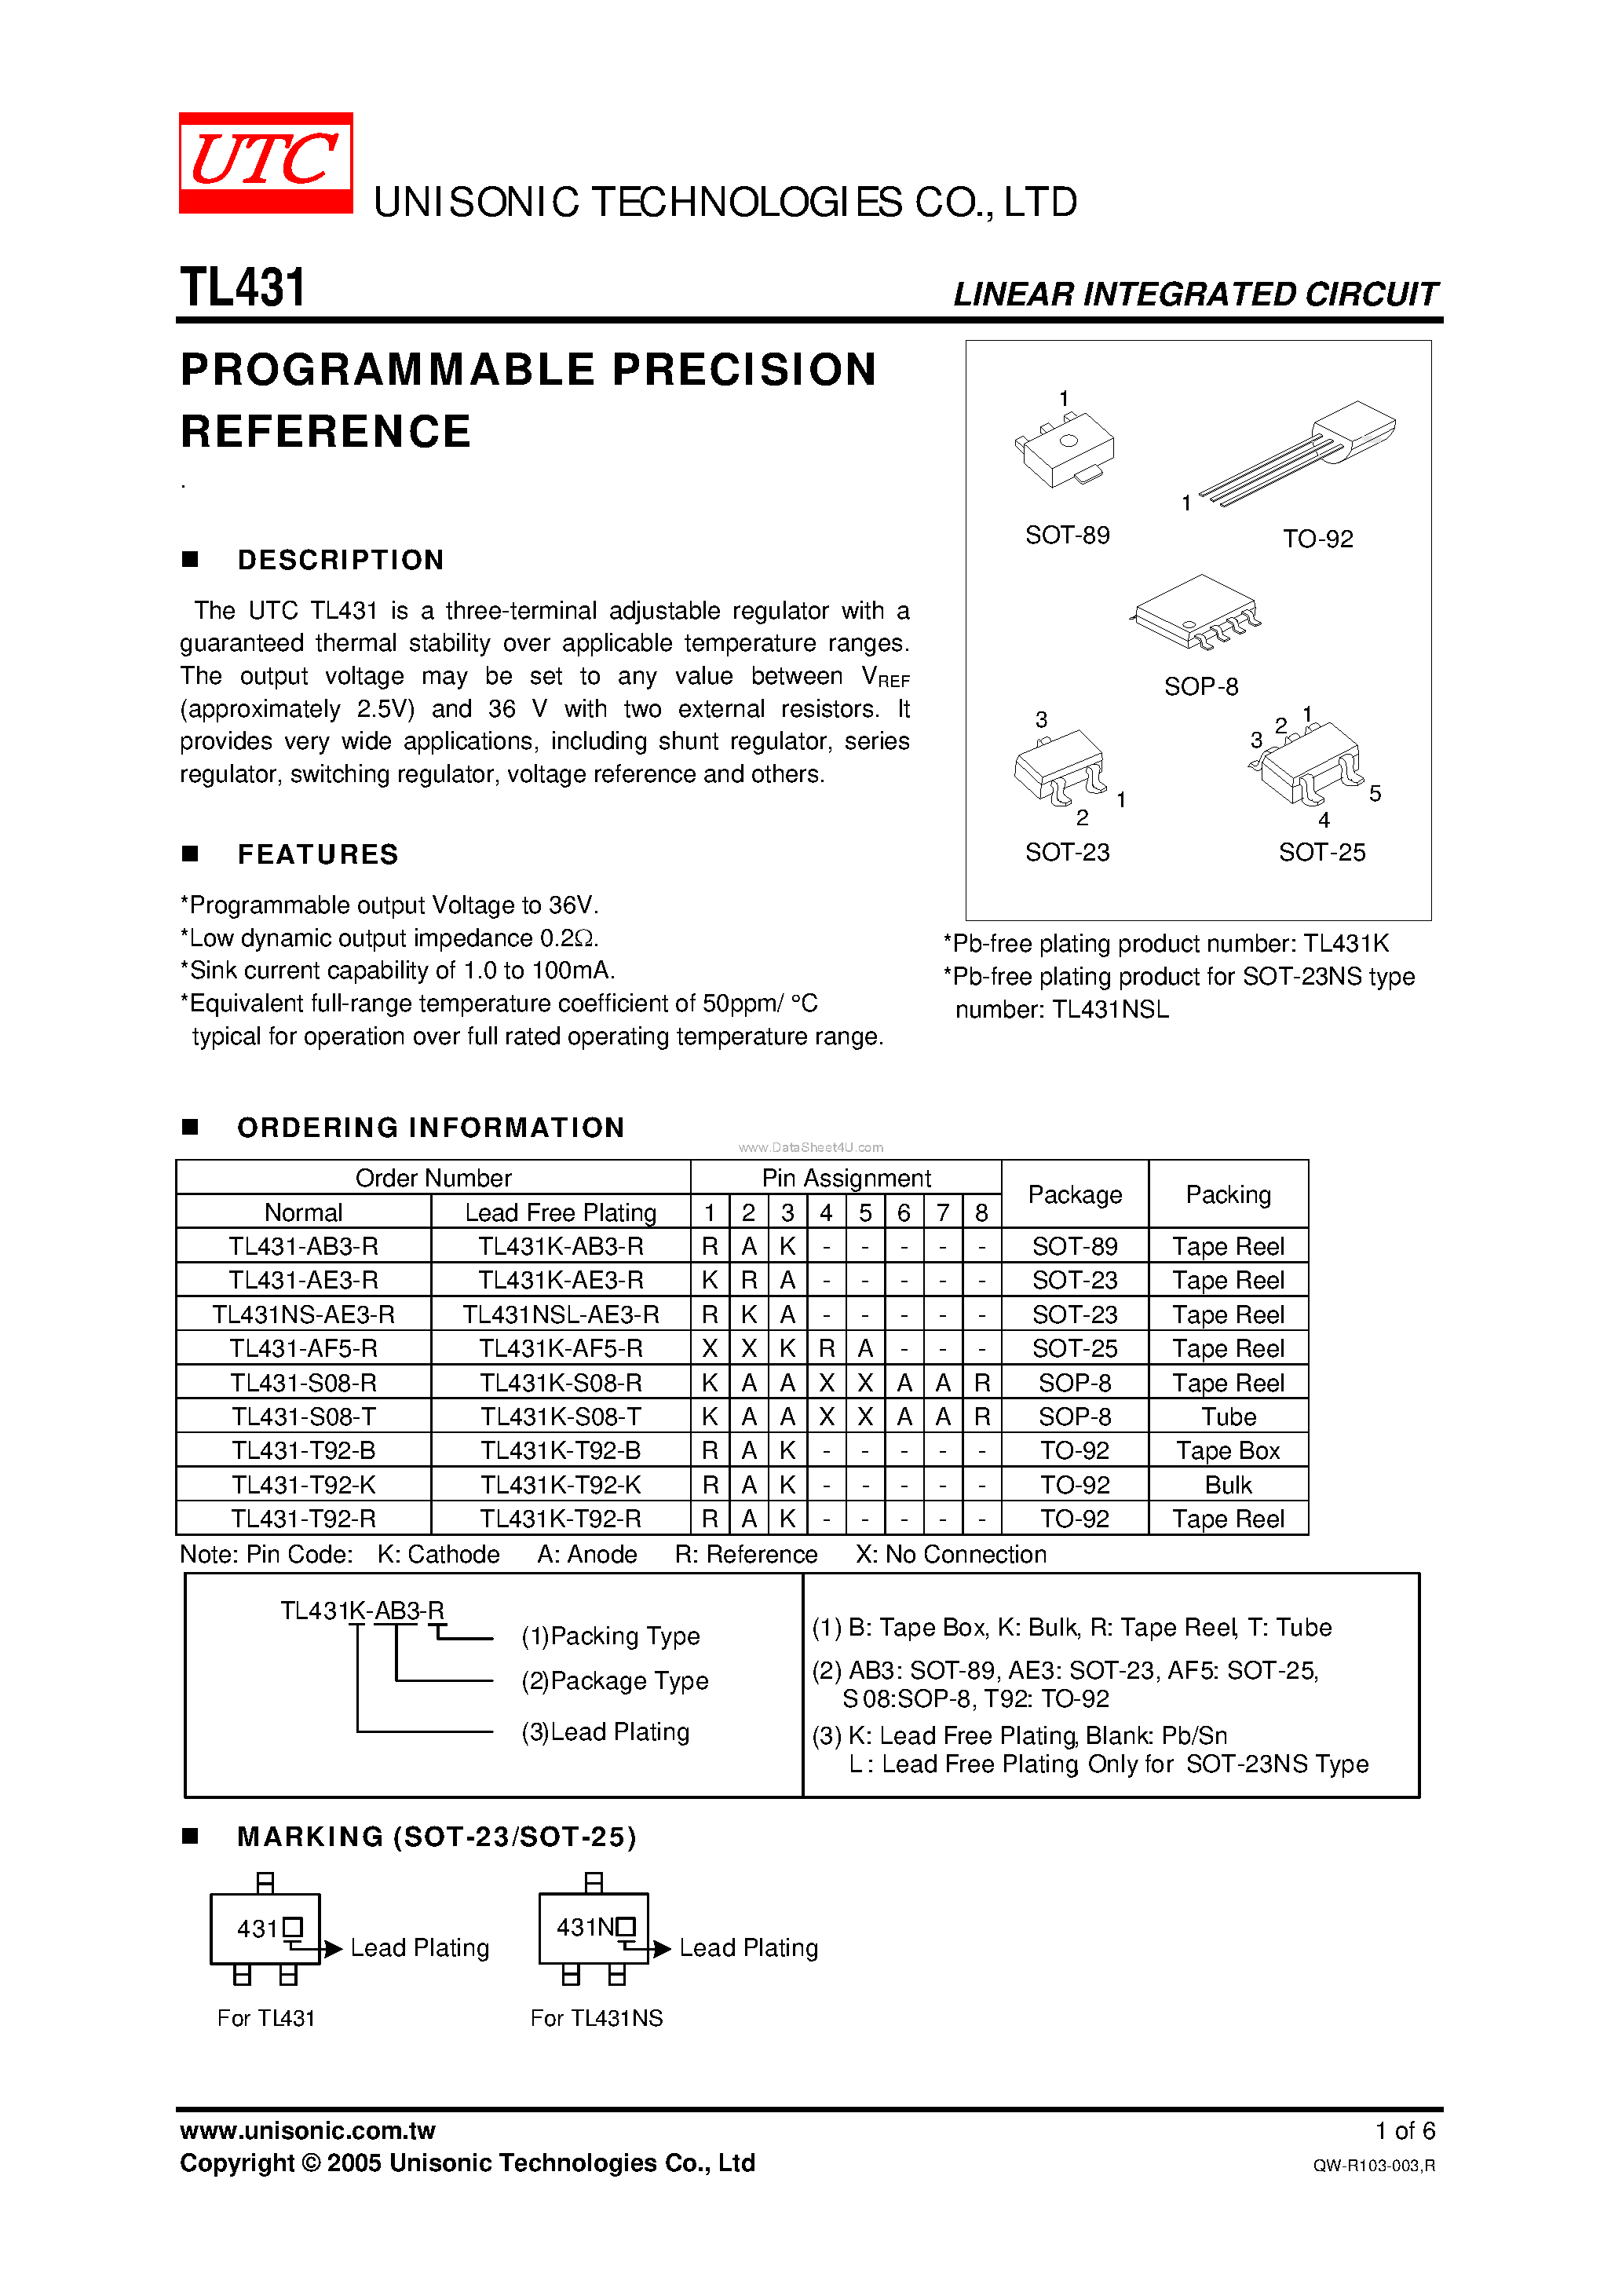 Datasheet TL431 - PROGRAMMABLE PRECISION REFERENCE page 1